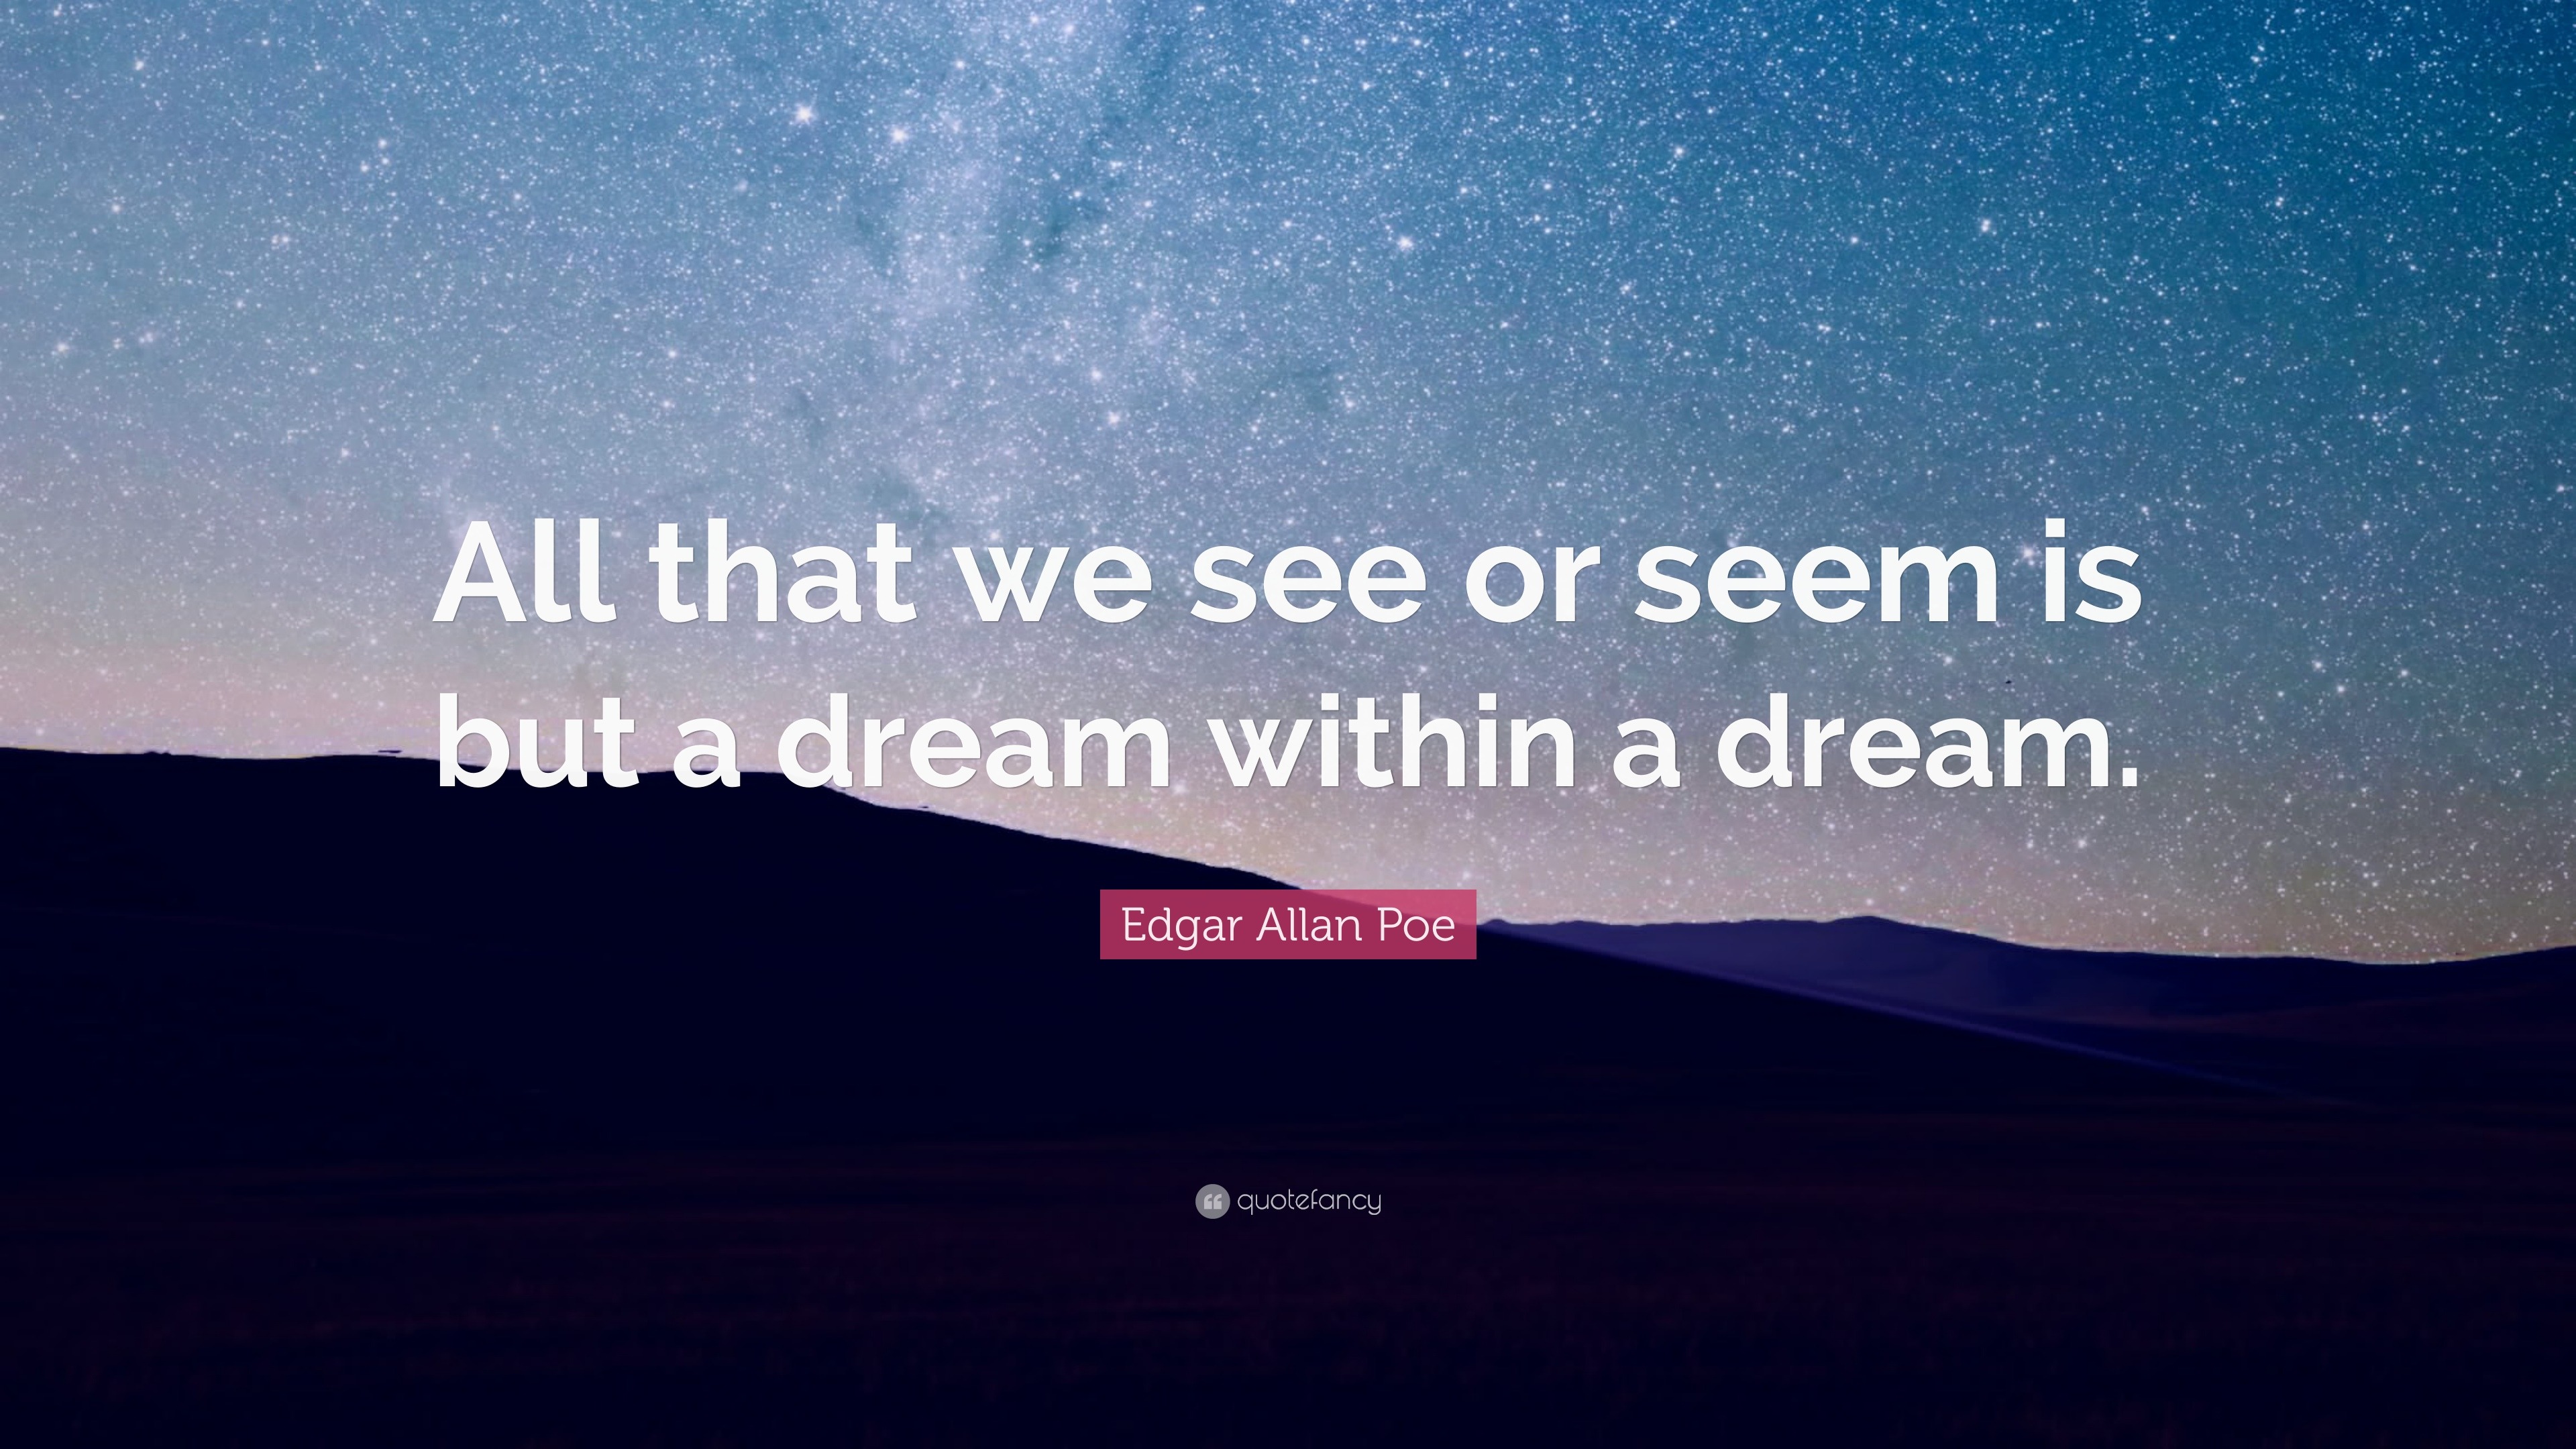 Edgar Allan Poe Quote All That We See Or Seem Is But A Dream Within A Dream 22 Wallpapers Quotefancy